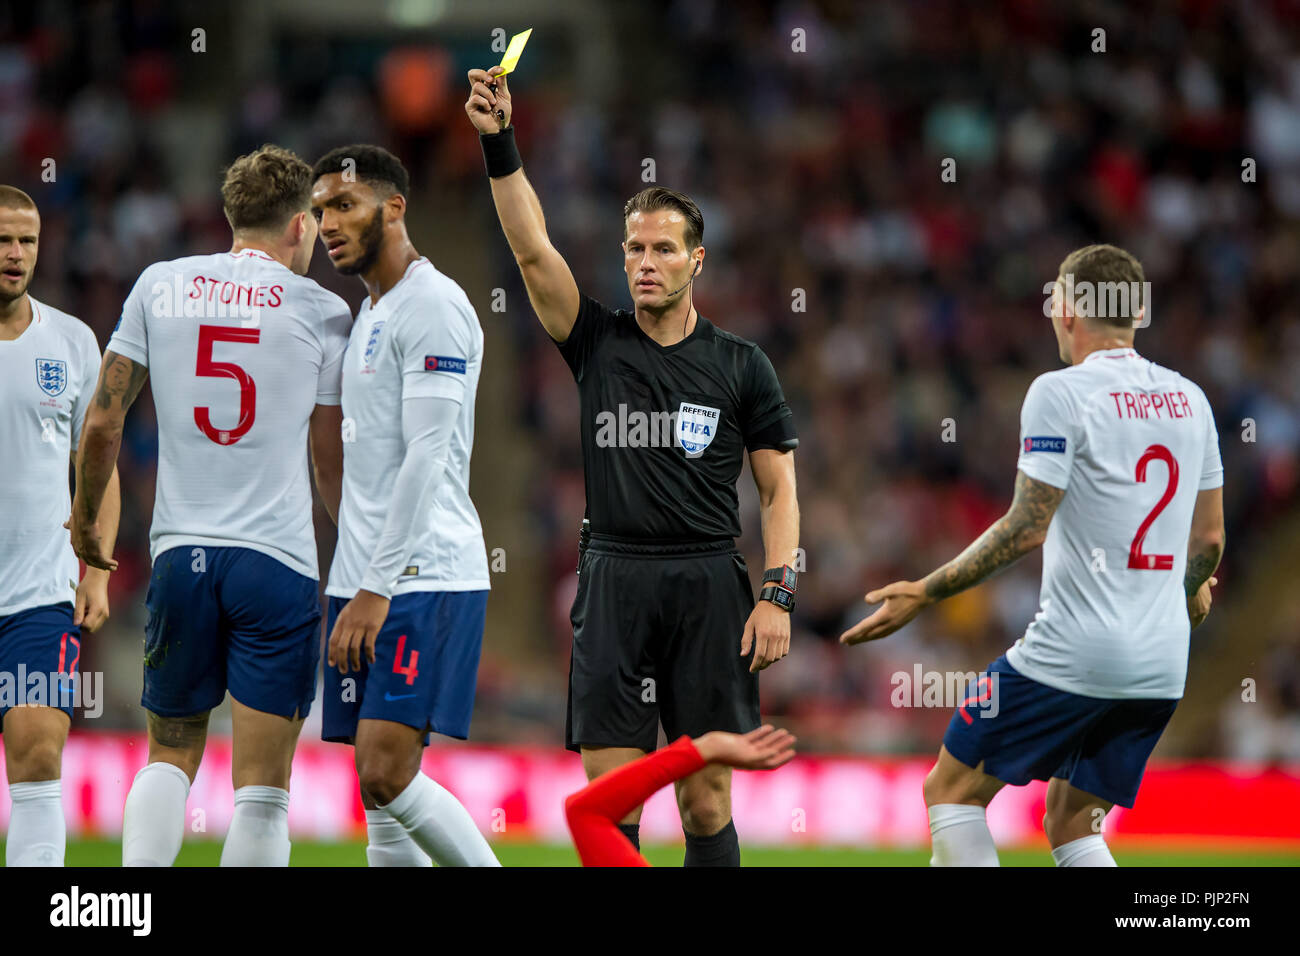 John Stones of England receives a yellow card during the UEFA Nation League, Group 4, League A match between England and Spain at Wembley Stadium, London, England on 8 September 2018. 8th Sep, 2018. Photo by Salvio Calabrese Credit: AFP7/ZUMA Wire/Alamy Live News Stock Photo